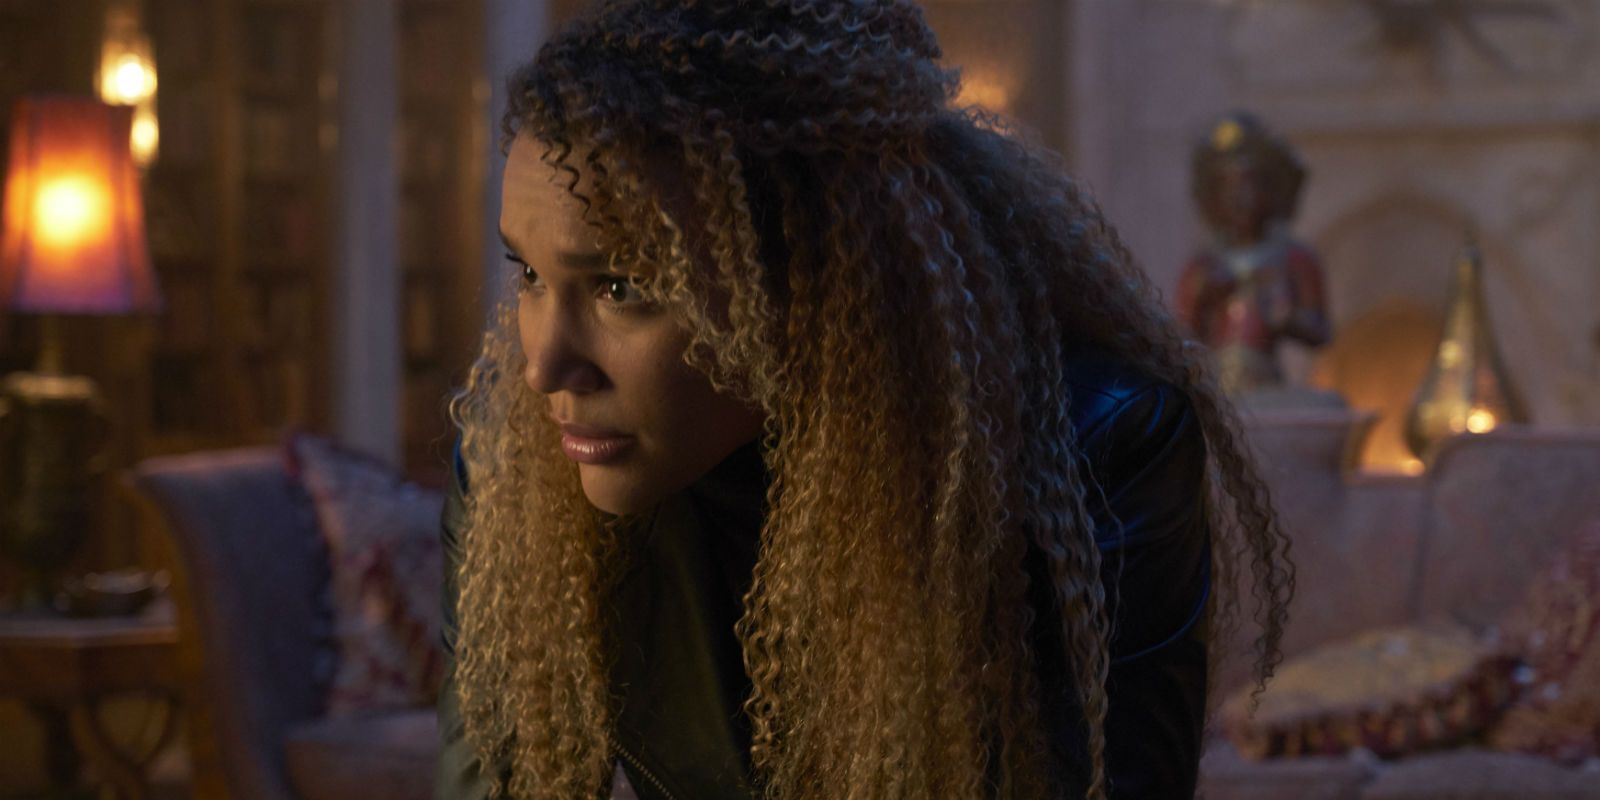 Emmy Raver-Lampman as Allison Hargreeves leaning over and looking worried in The Umbrella Academy